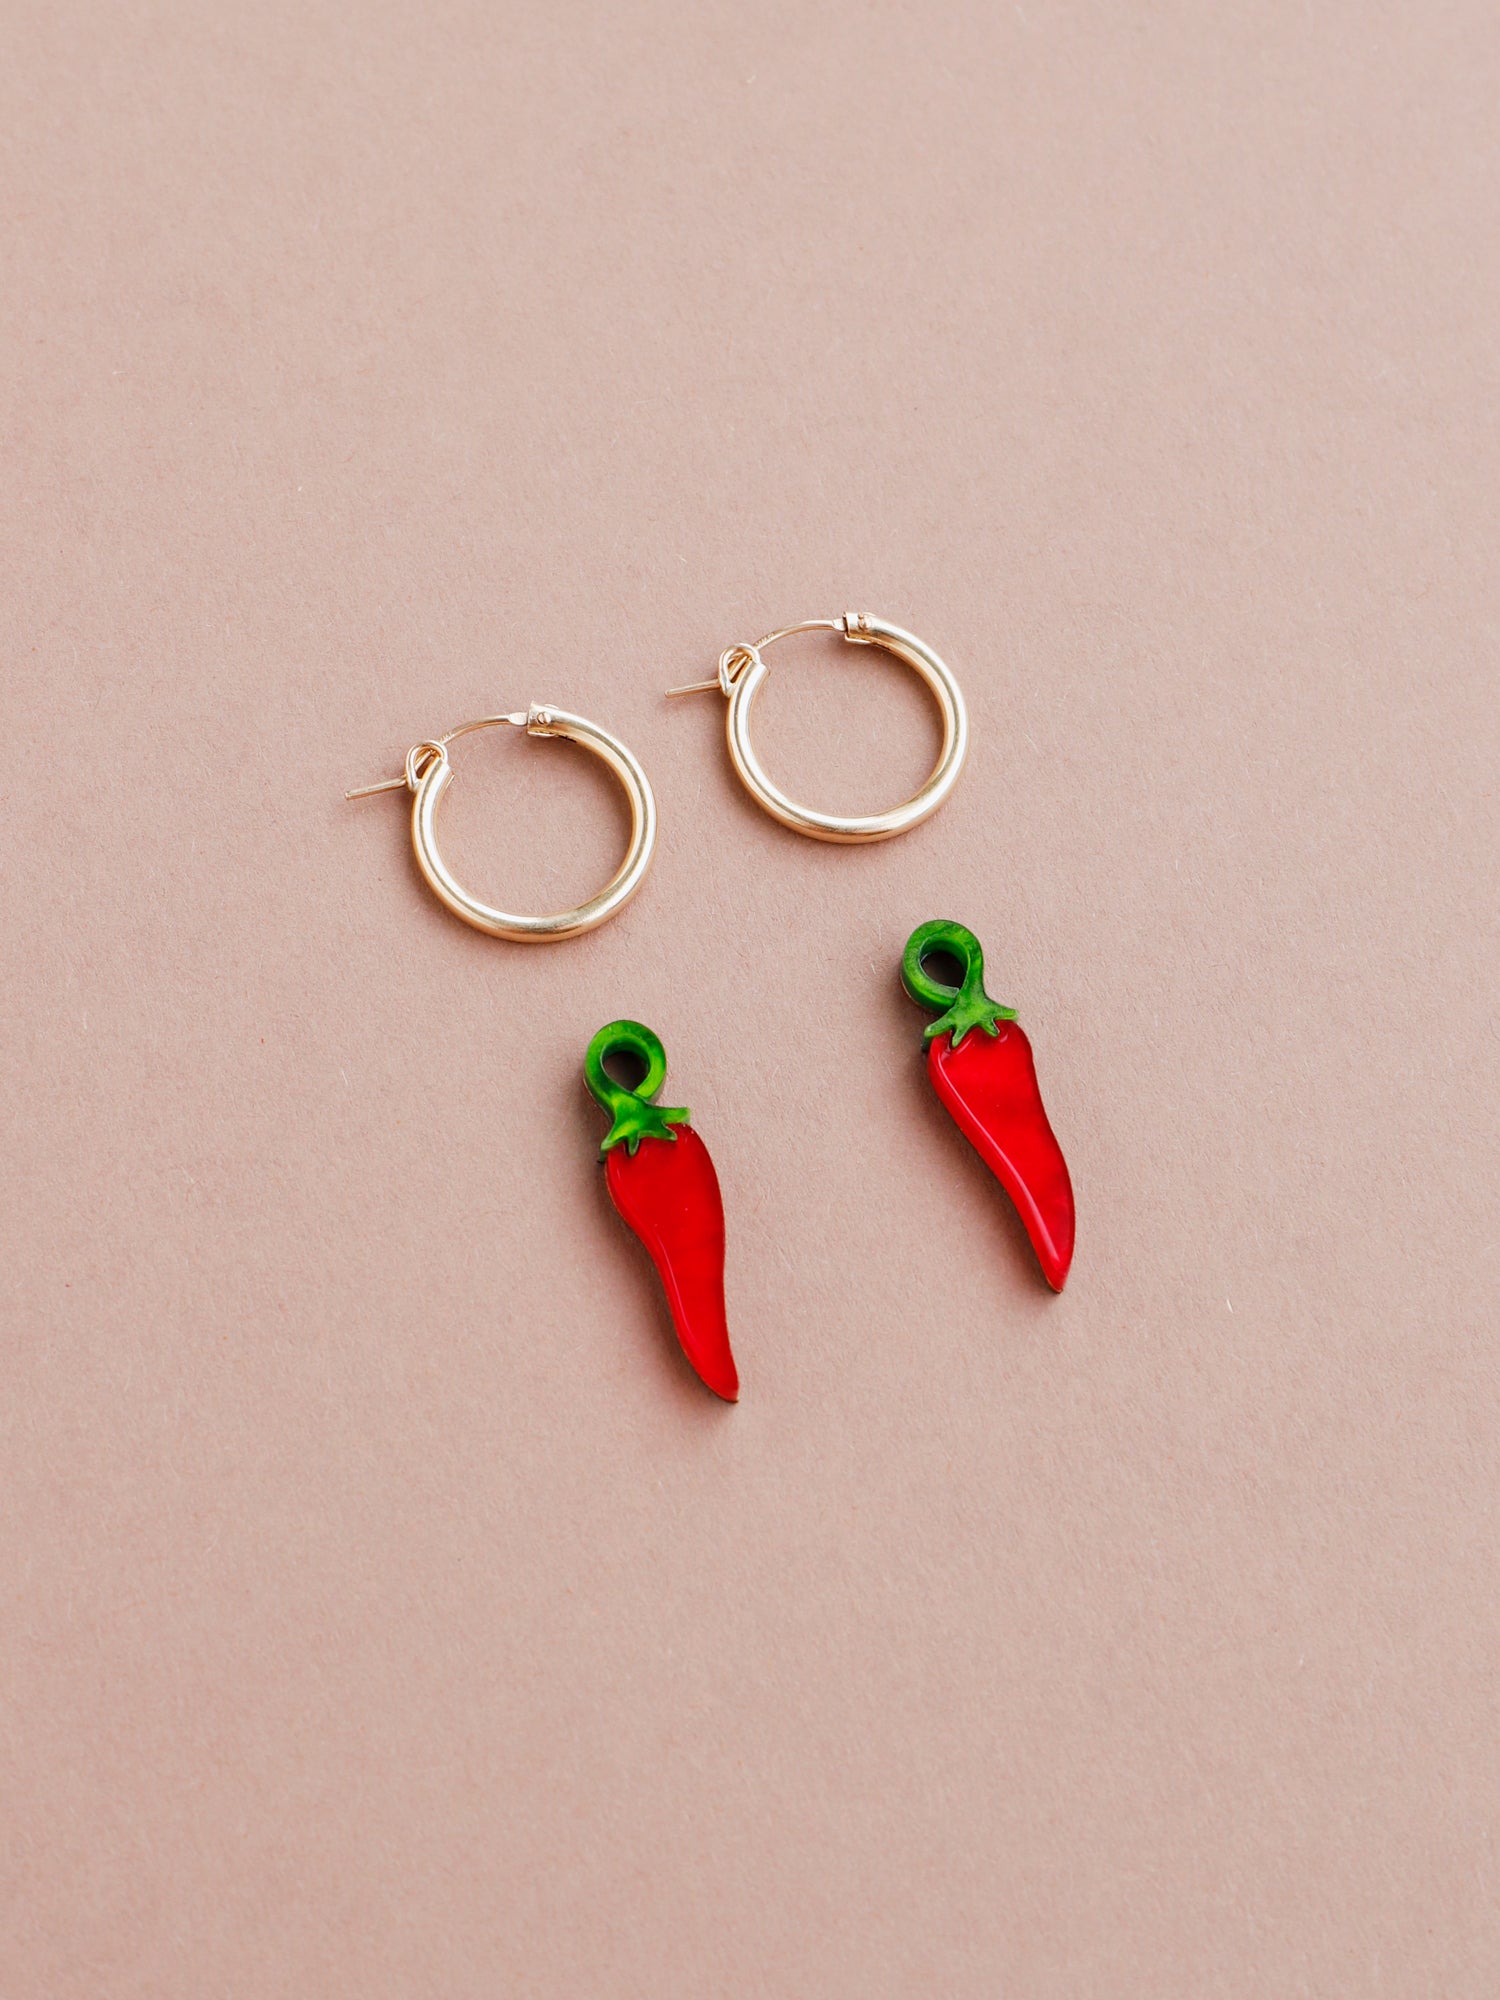 Red chilli pepper acrylic charms with optional gold-filled hoops. Handmade in London by Wolf & Moon.